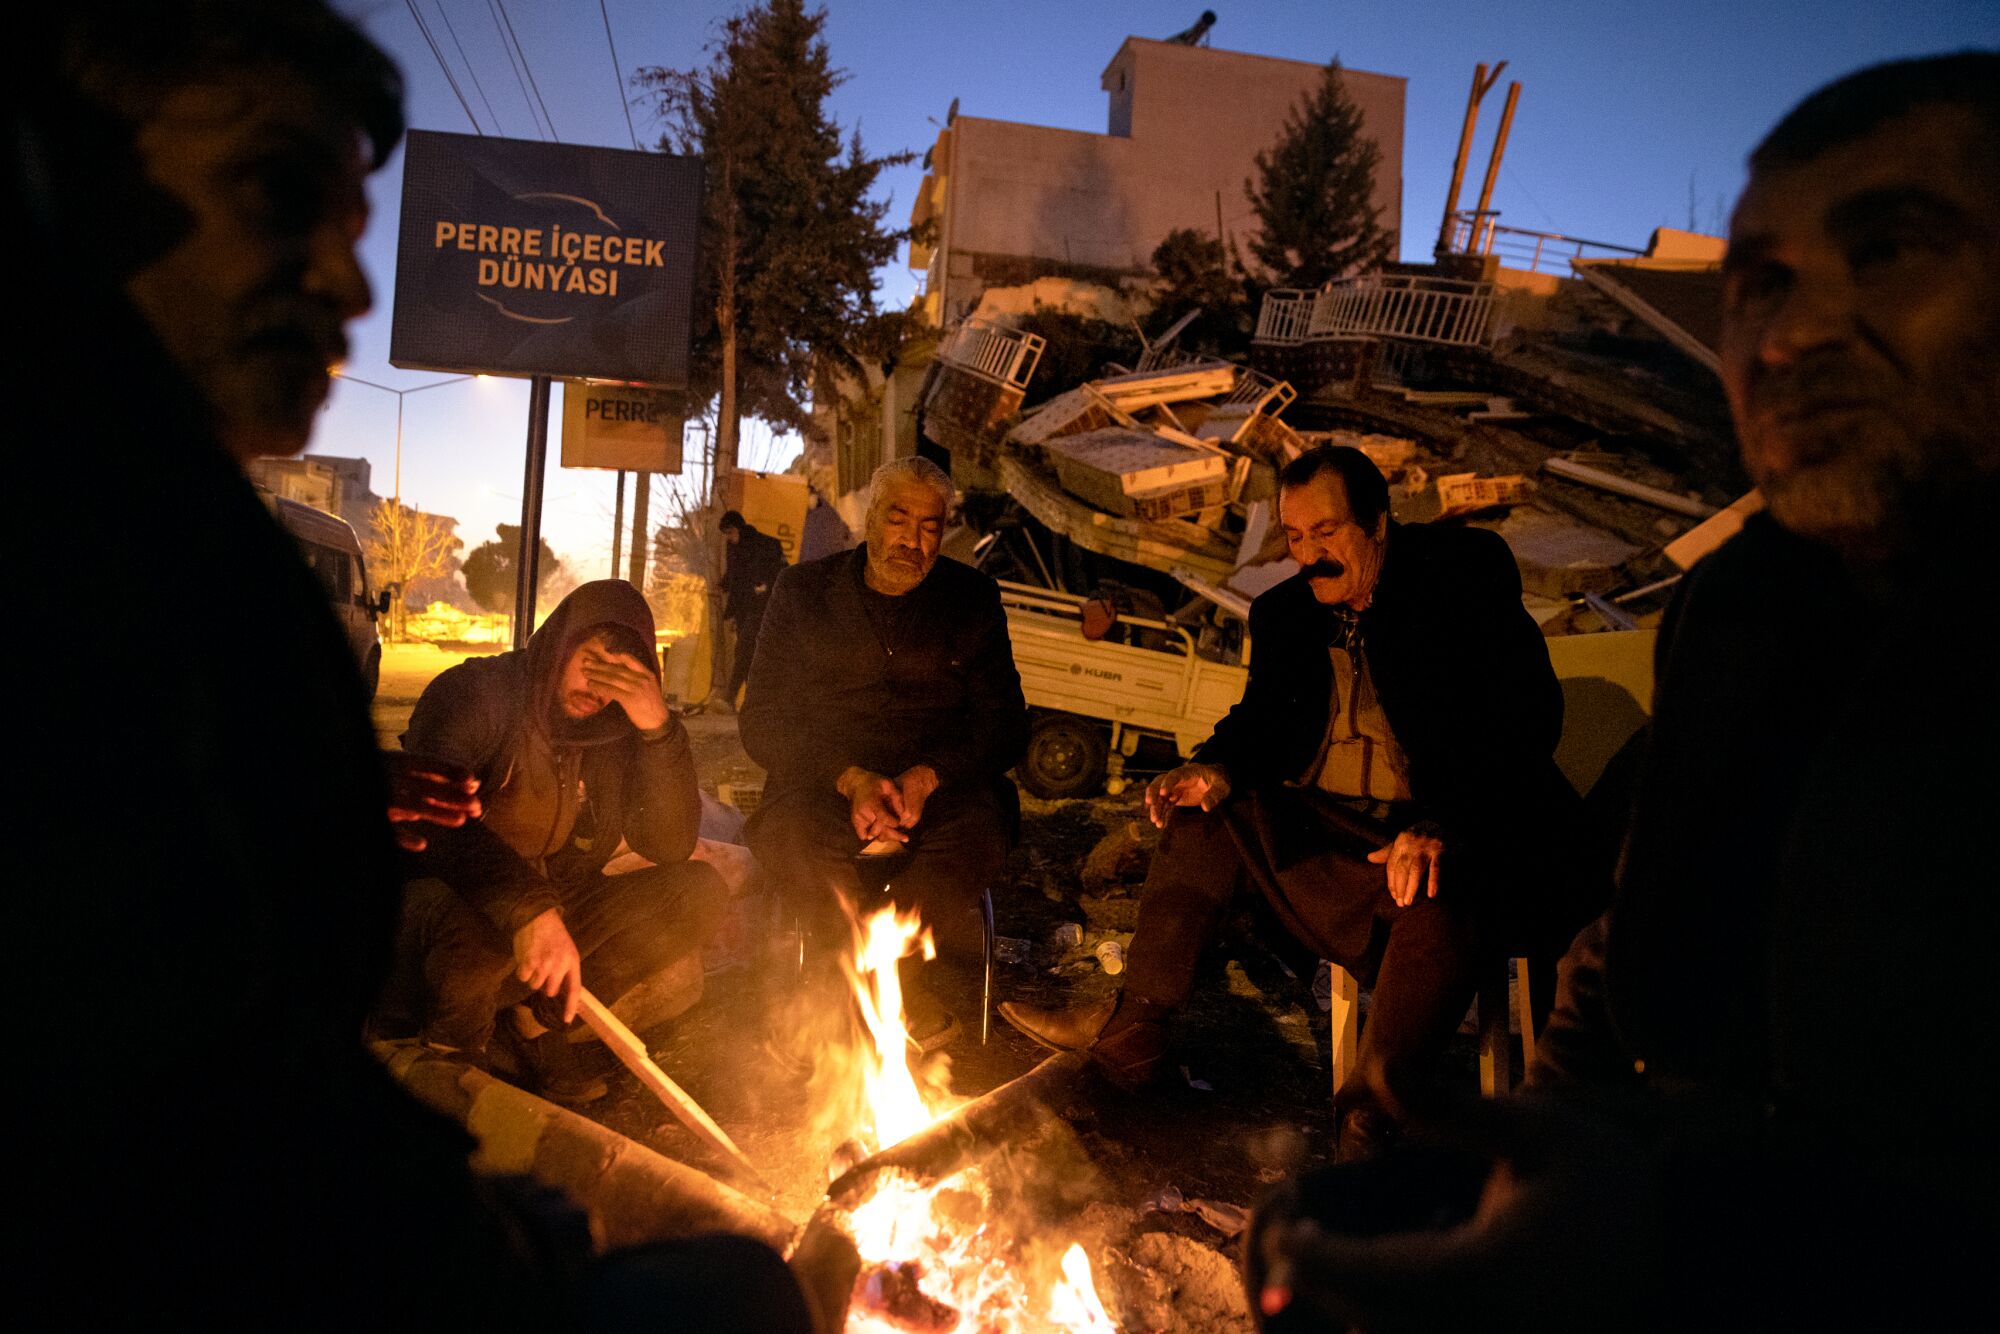 Five men, looking tired and sad, sit around a campfire at night. A collapsed concrete building is behind them.